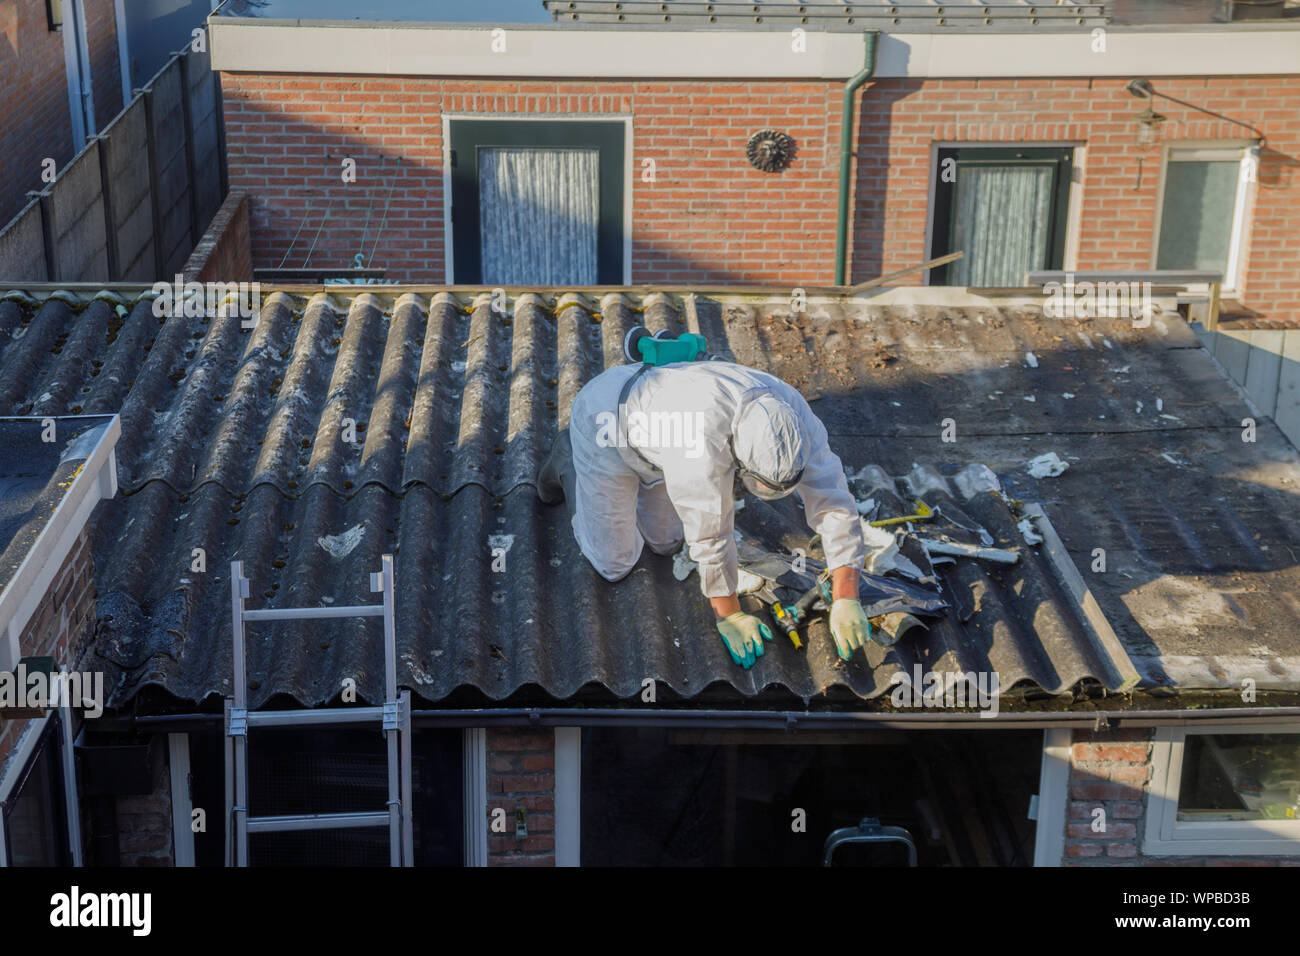 Professional asbestos removal. Men in protective suits are removing asbestos cement corrugated roofing Stock Photo